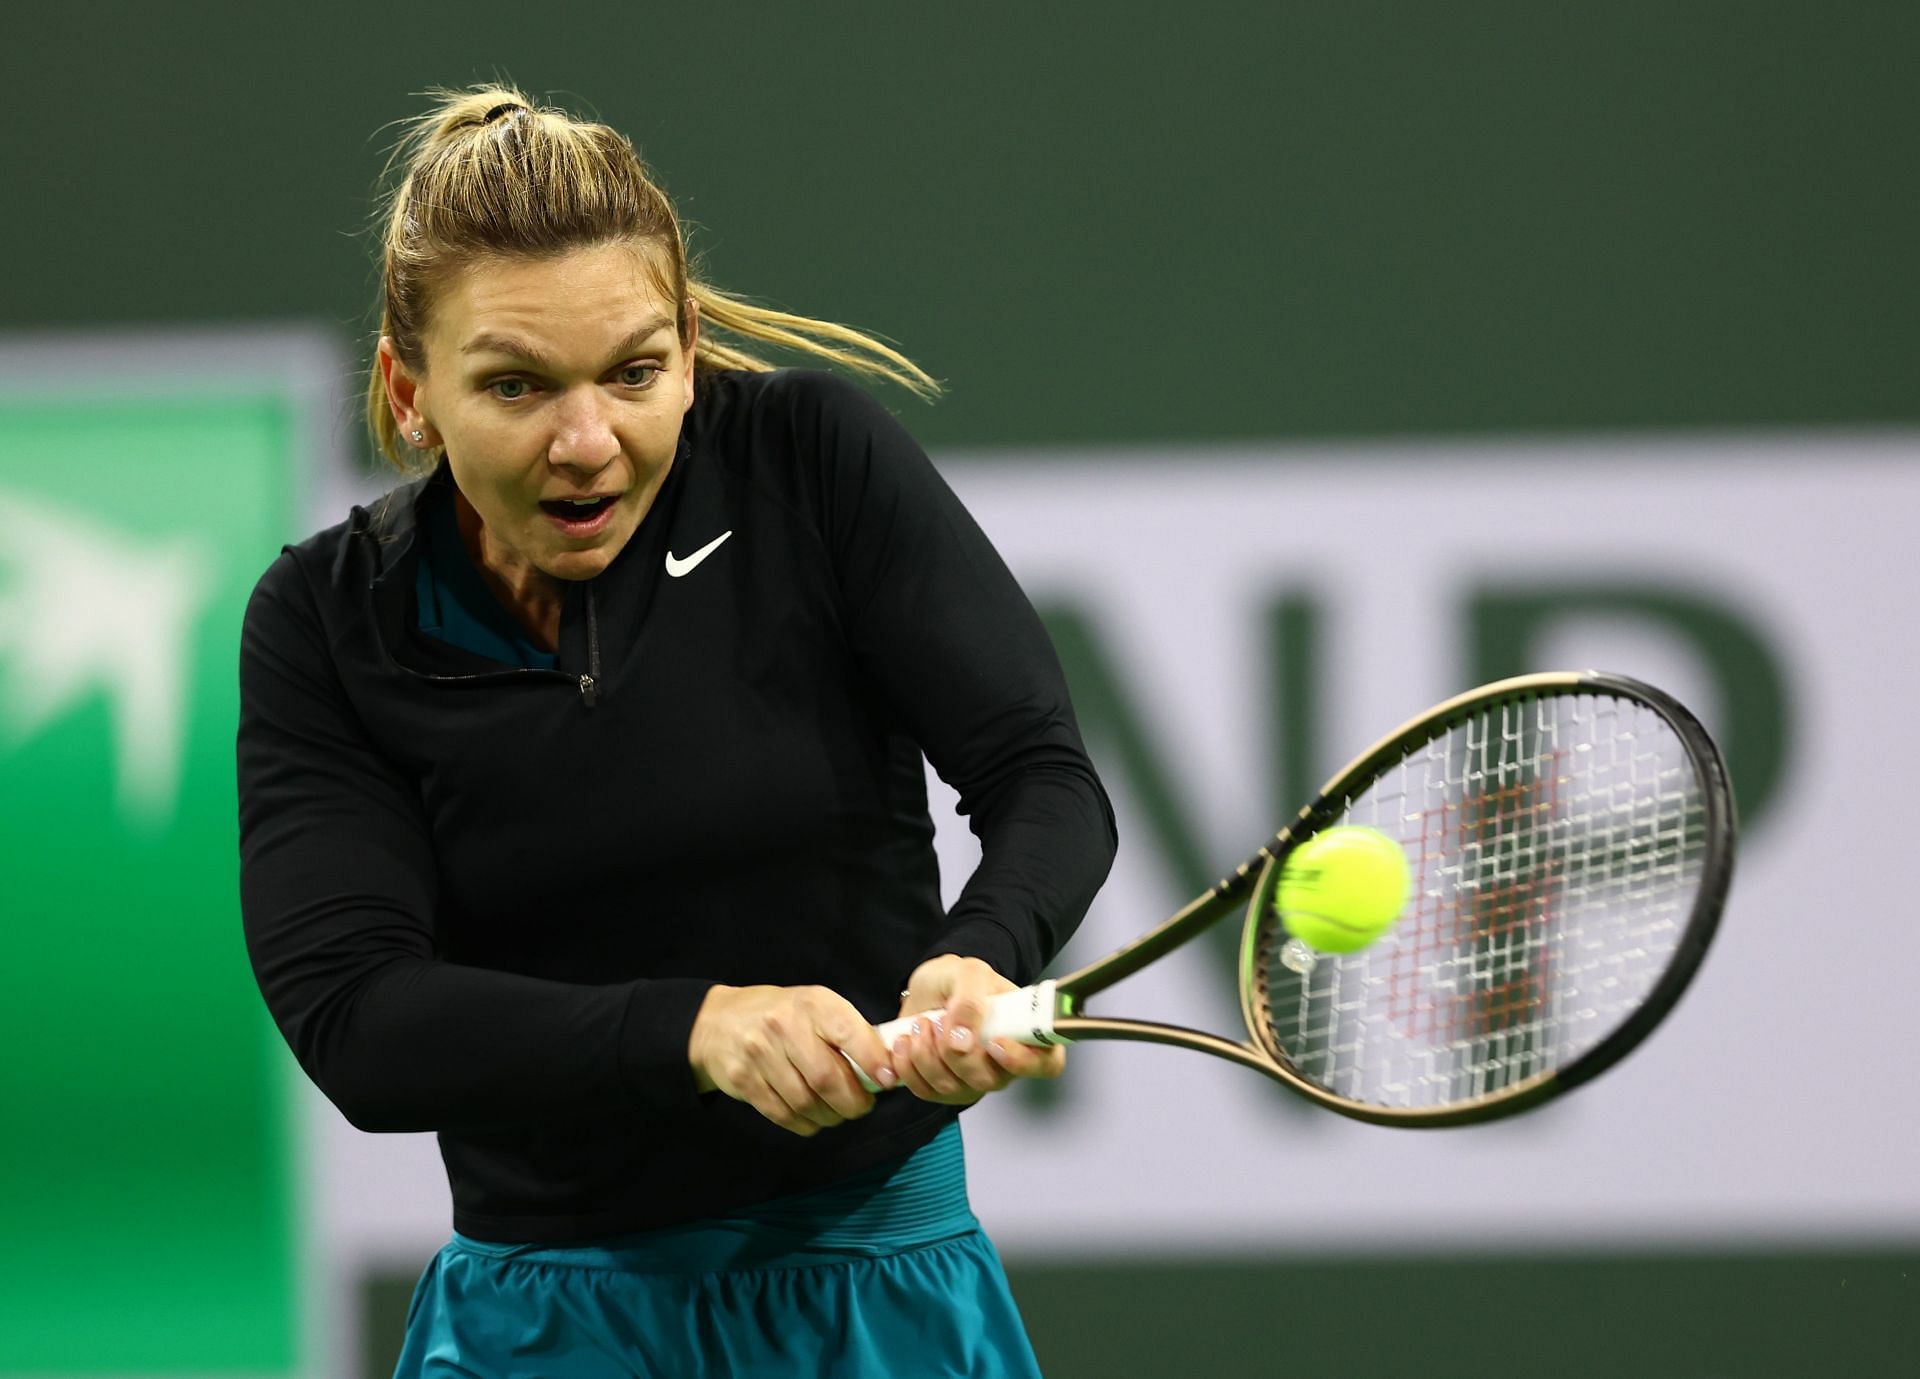 Simona Halep has won 11 out of 14 matches in 2022 so far